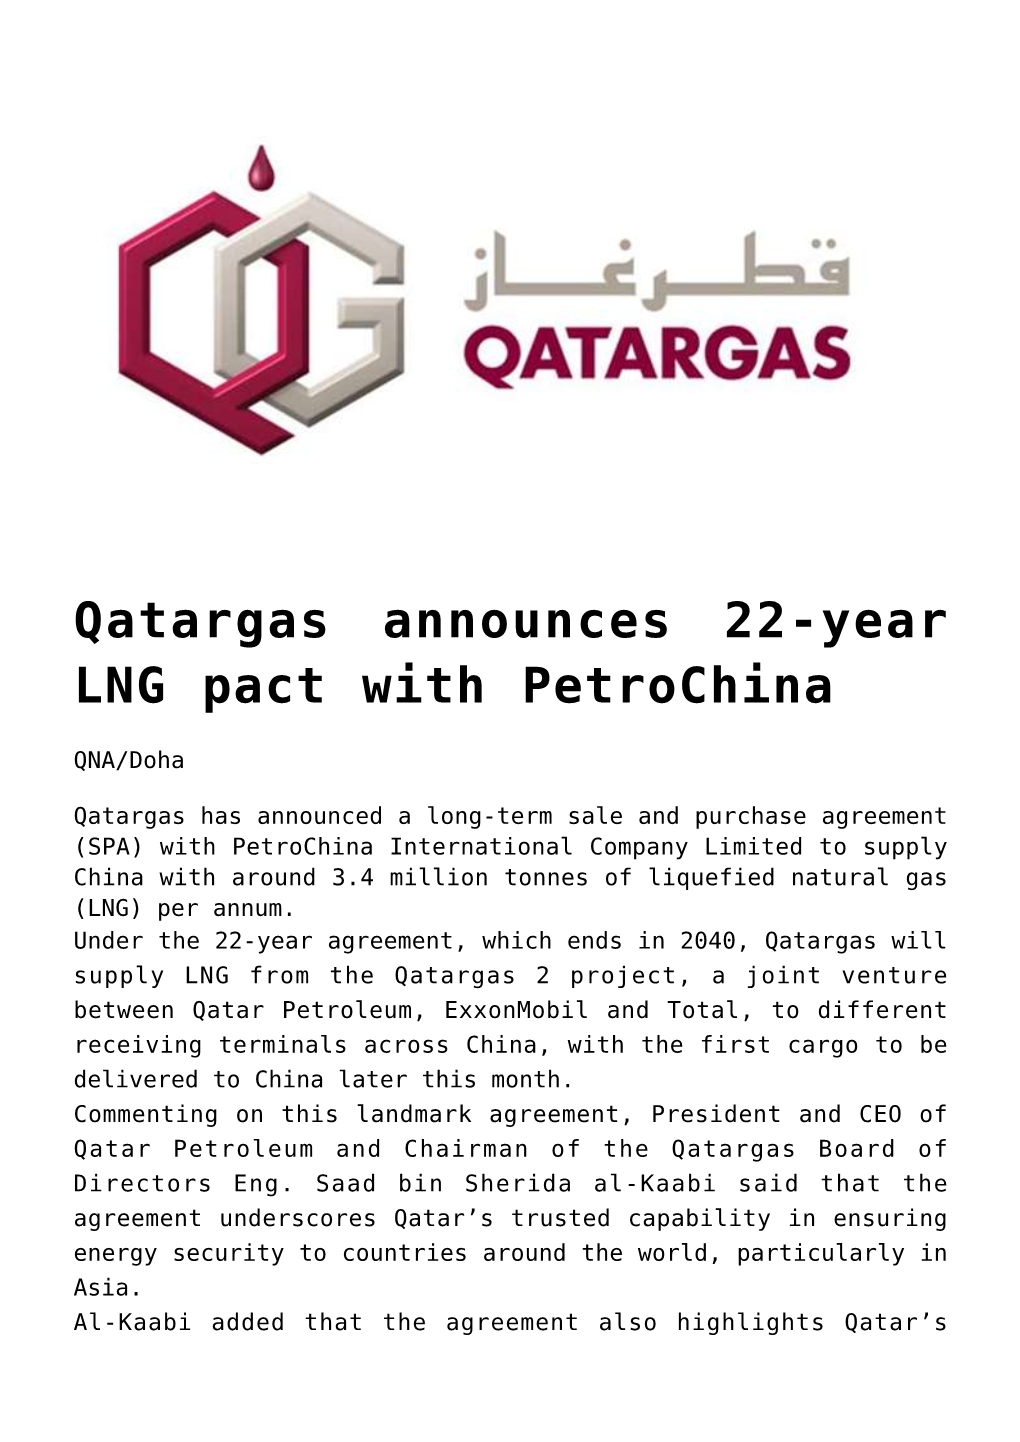 Qatargas Announces 22-Year LNG Pact with Petrochina,Crude